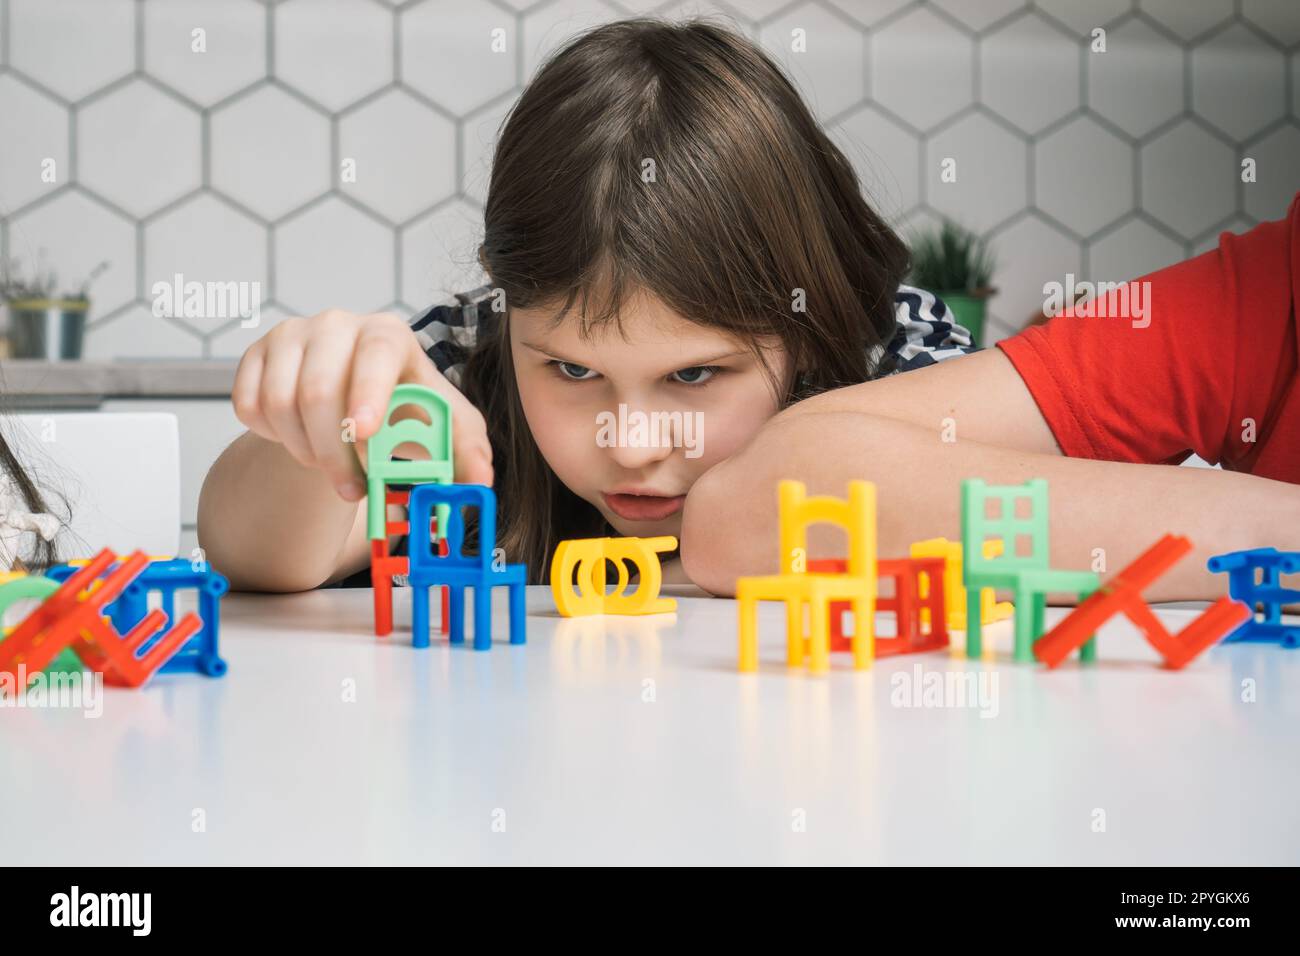 Thoughtful, focused little girl building and holding small green chair toy near many colorful chair toys on white table Stock Photo